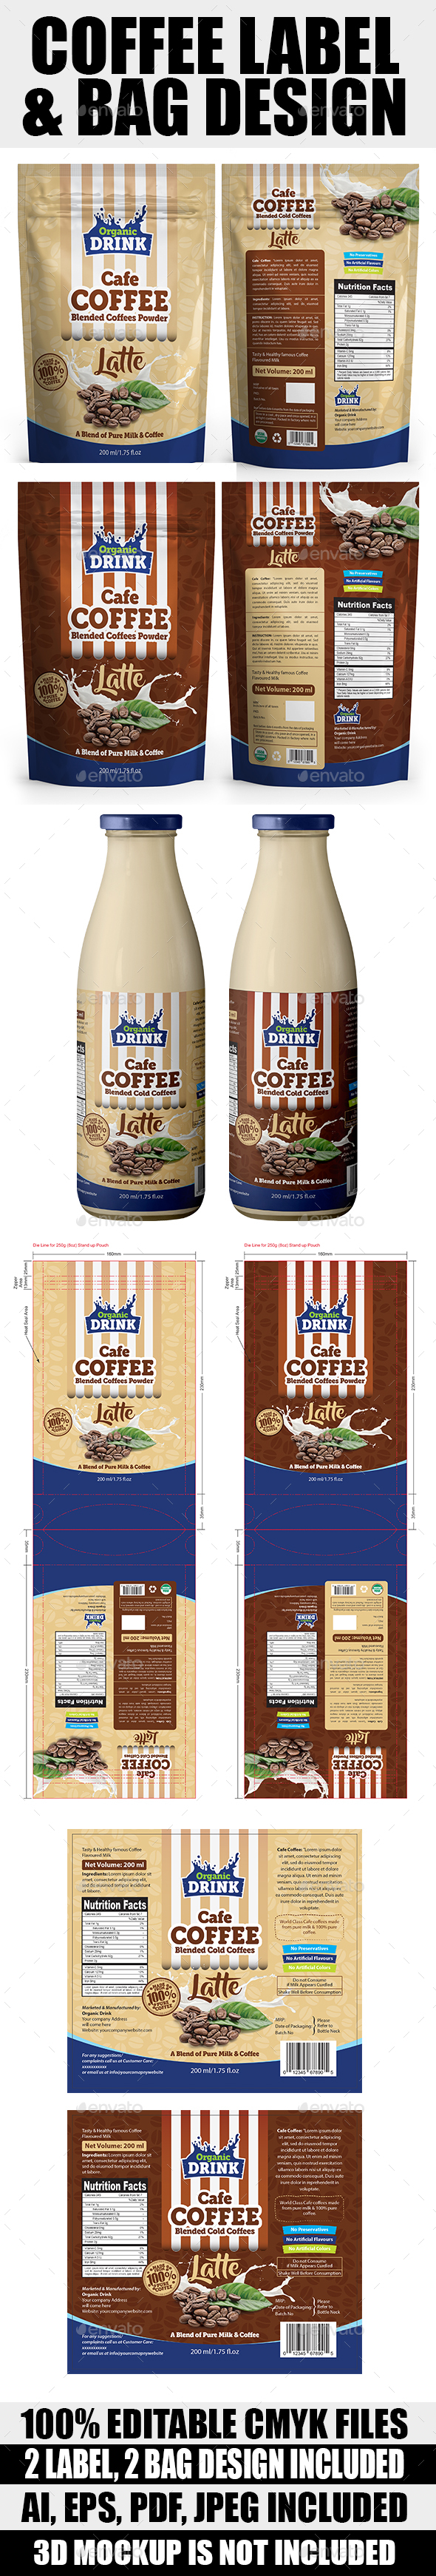 Coffee Label & Bag Templates by Artsoldiers GraphicRiver